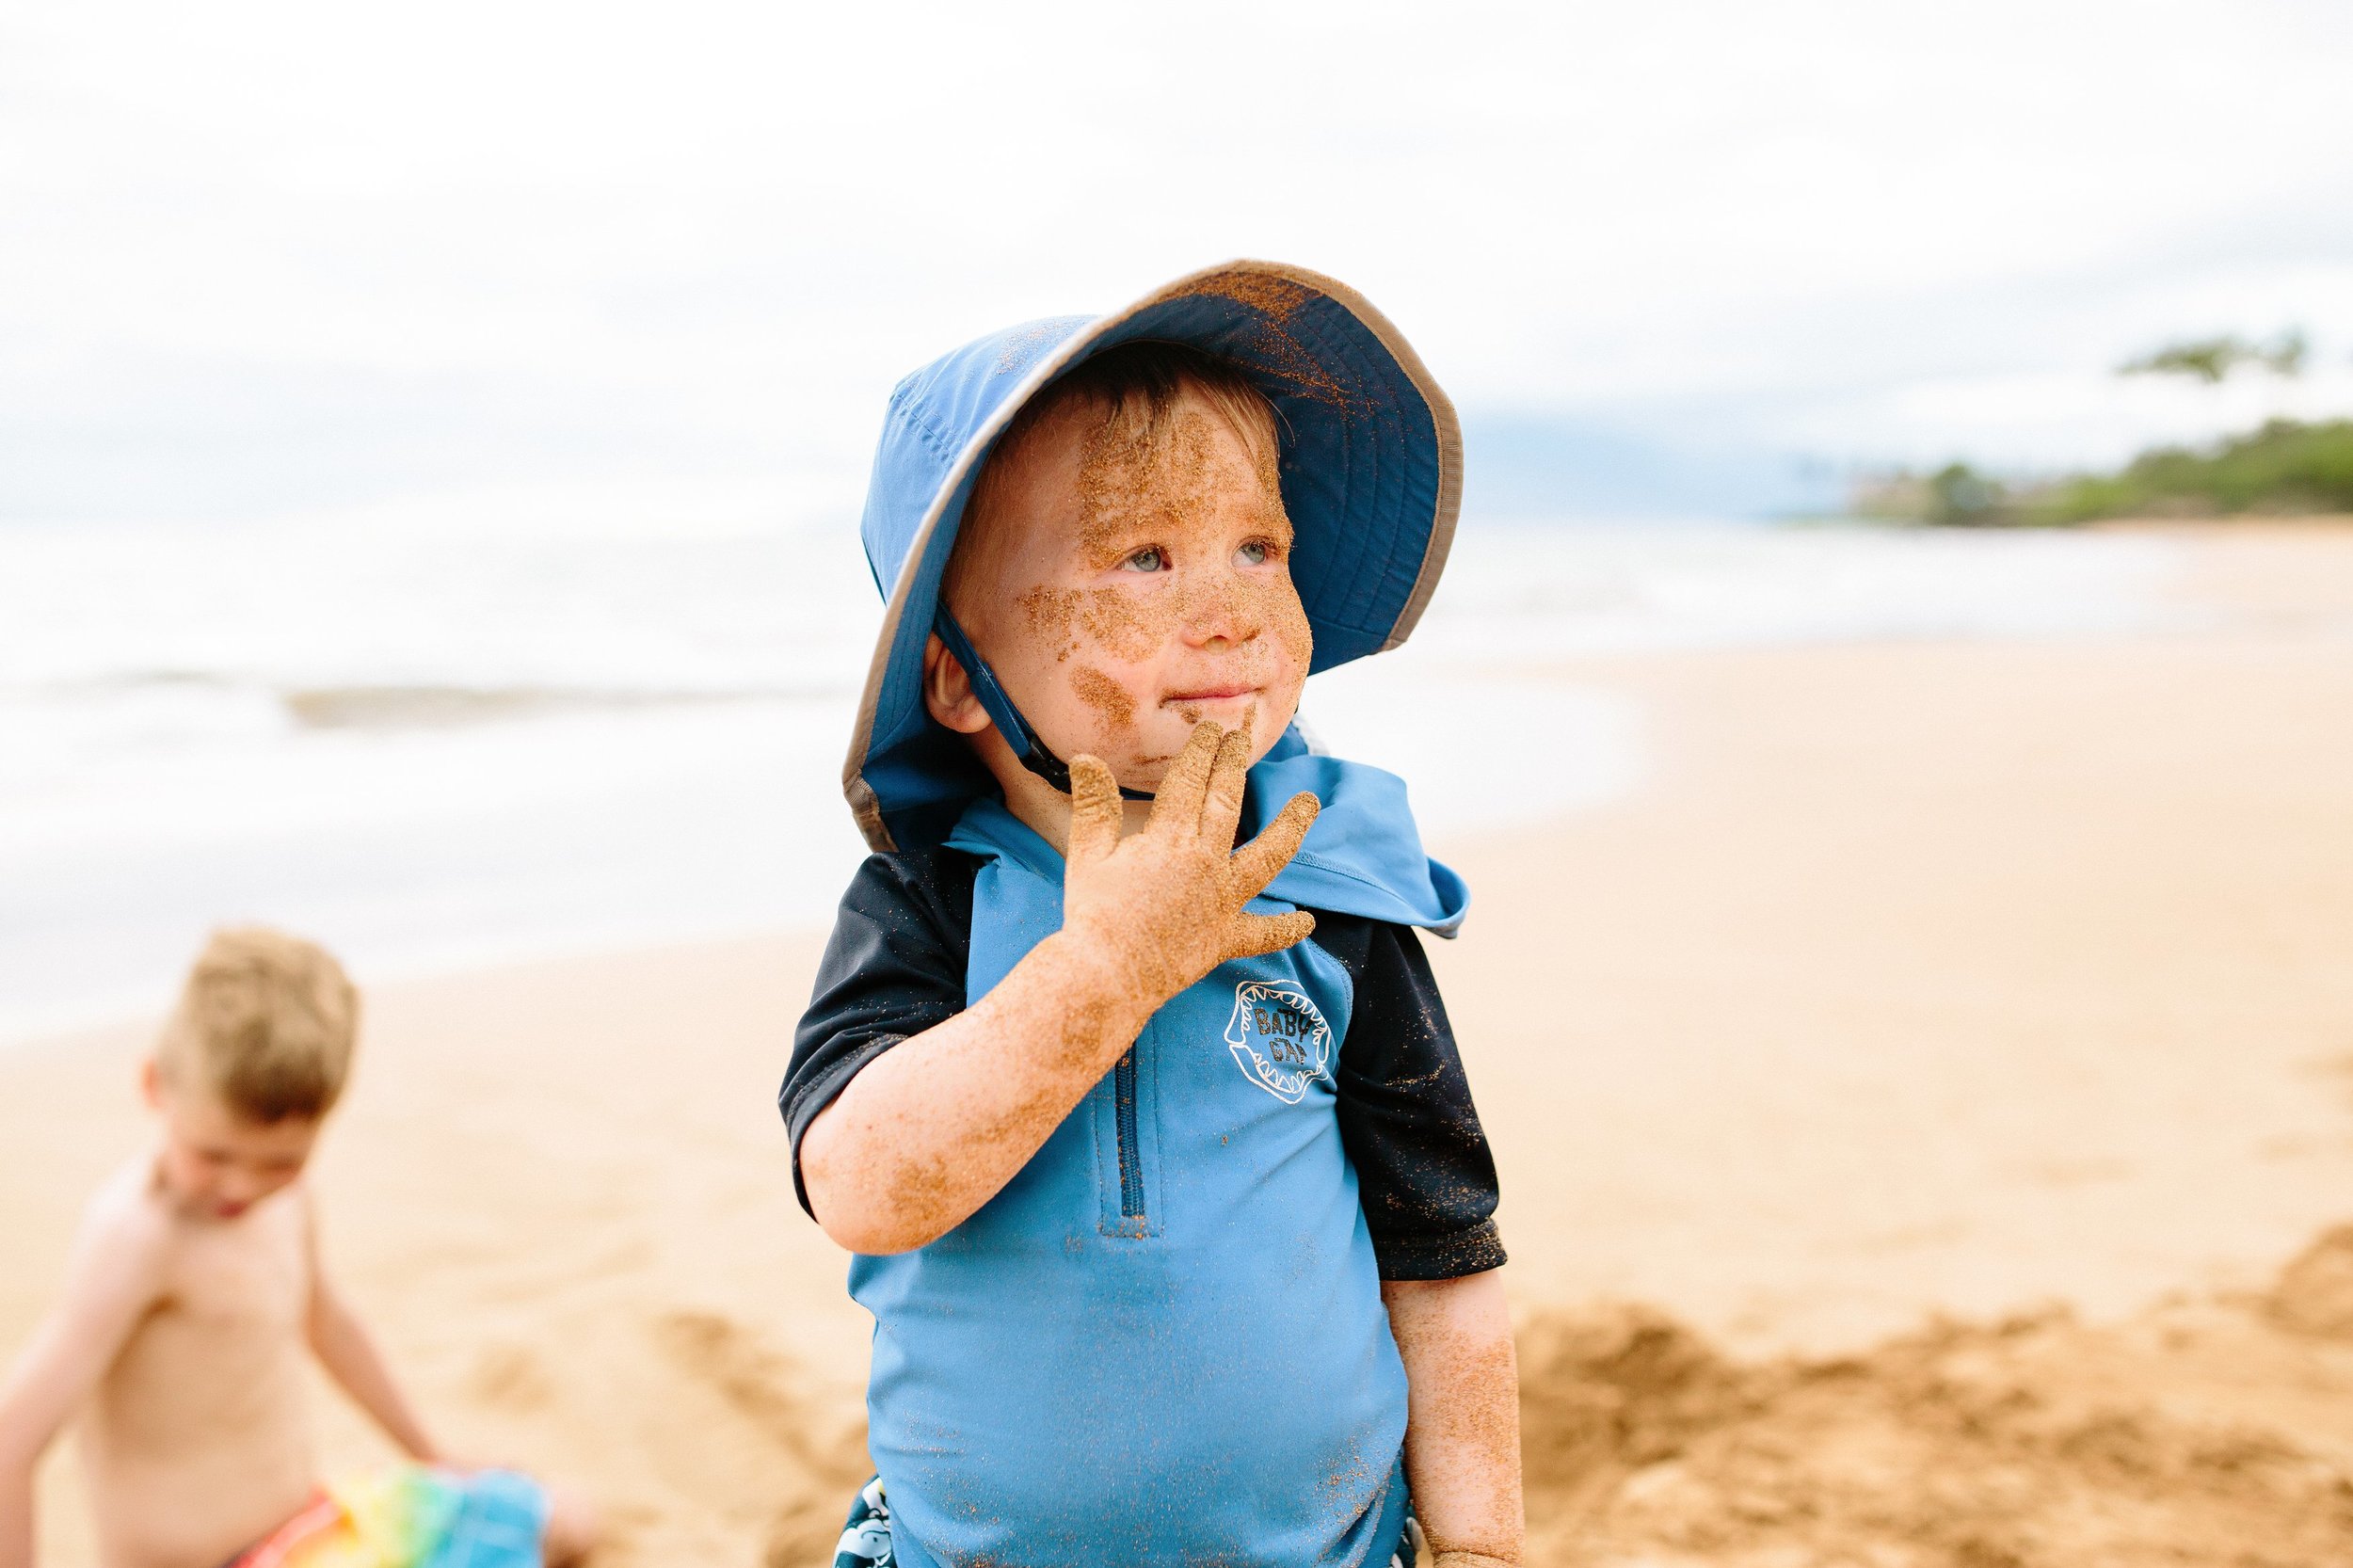 Kid eating sand Family Beach Day Photo Session on Maui by Seattle Lifestyle Photographer Janelle Elaine Photography.jpg